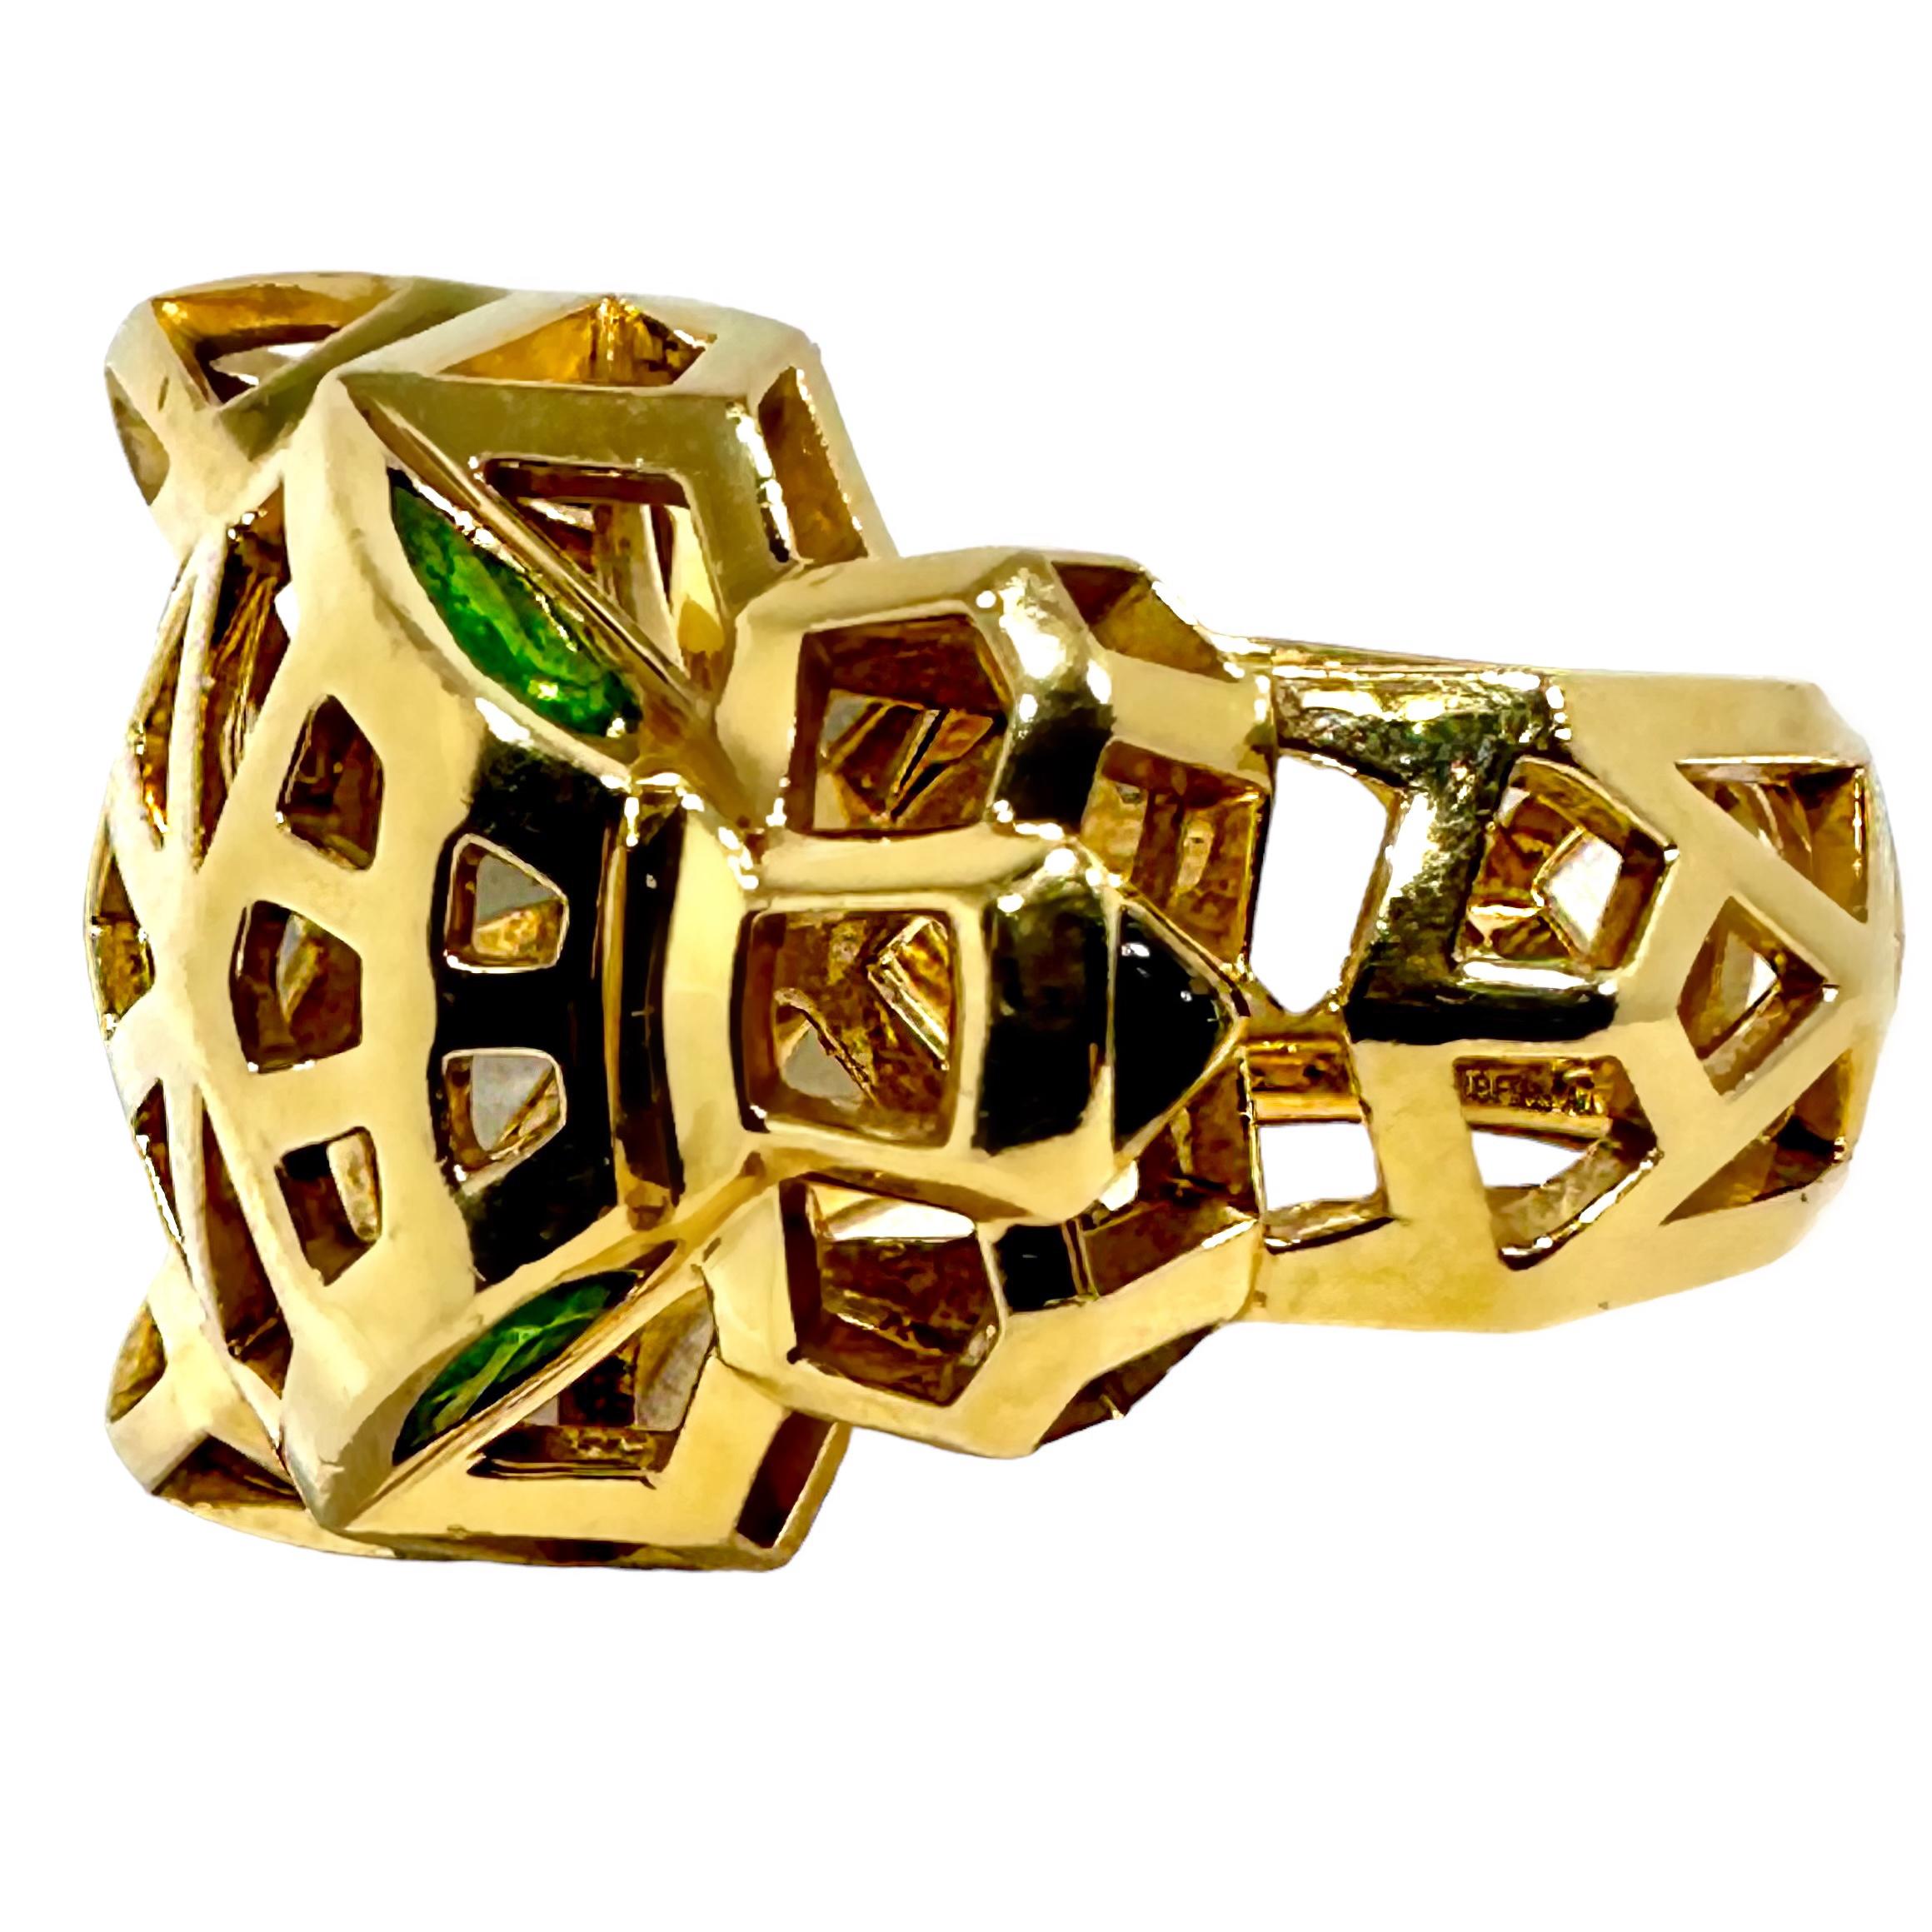 This ladies, French Cartier creation is astonishing and dramatic in both scale and design. The entire highly stylized and extremely dimensional panther head is pierced in geometric patterns over its entire surface. Large green tsavorite garnet eyes